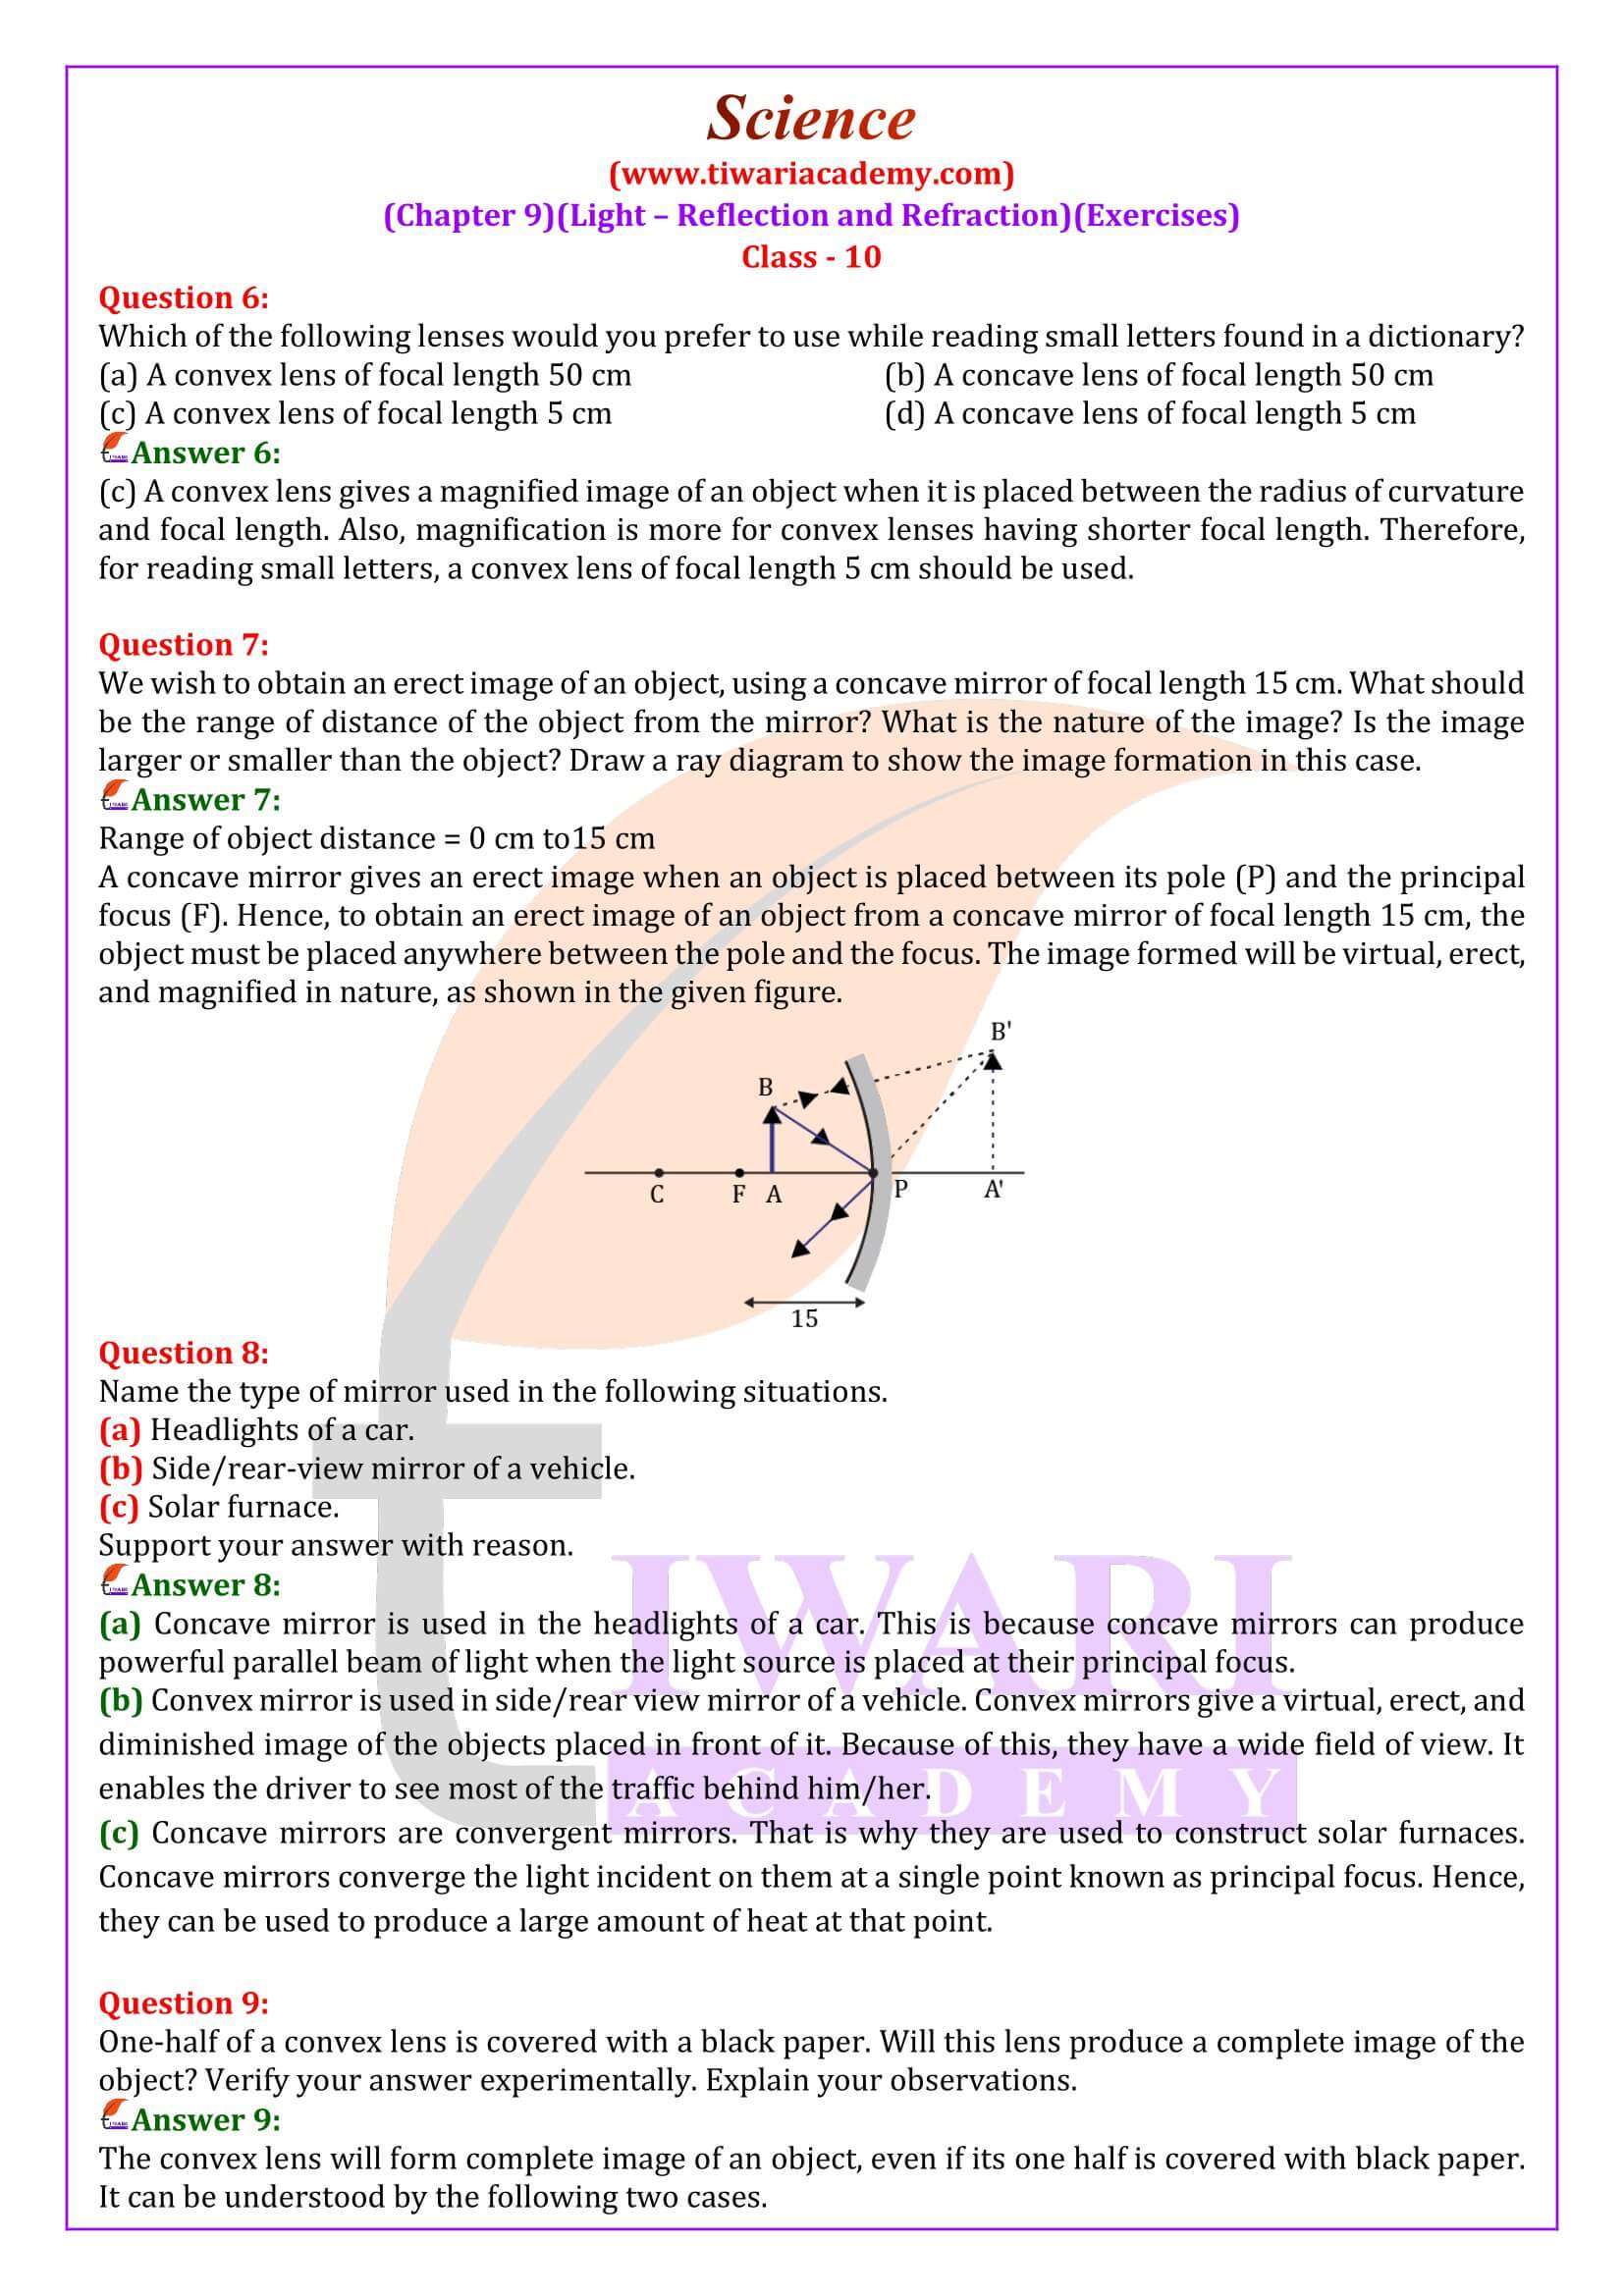 NCERT Solutions for Class 10 Science Chapter 9